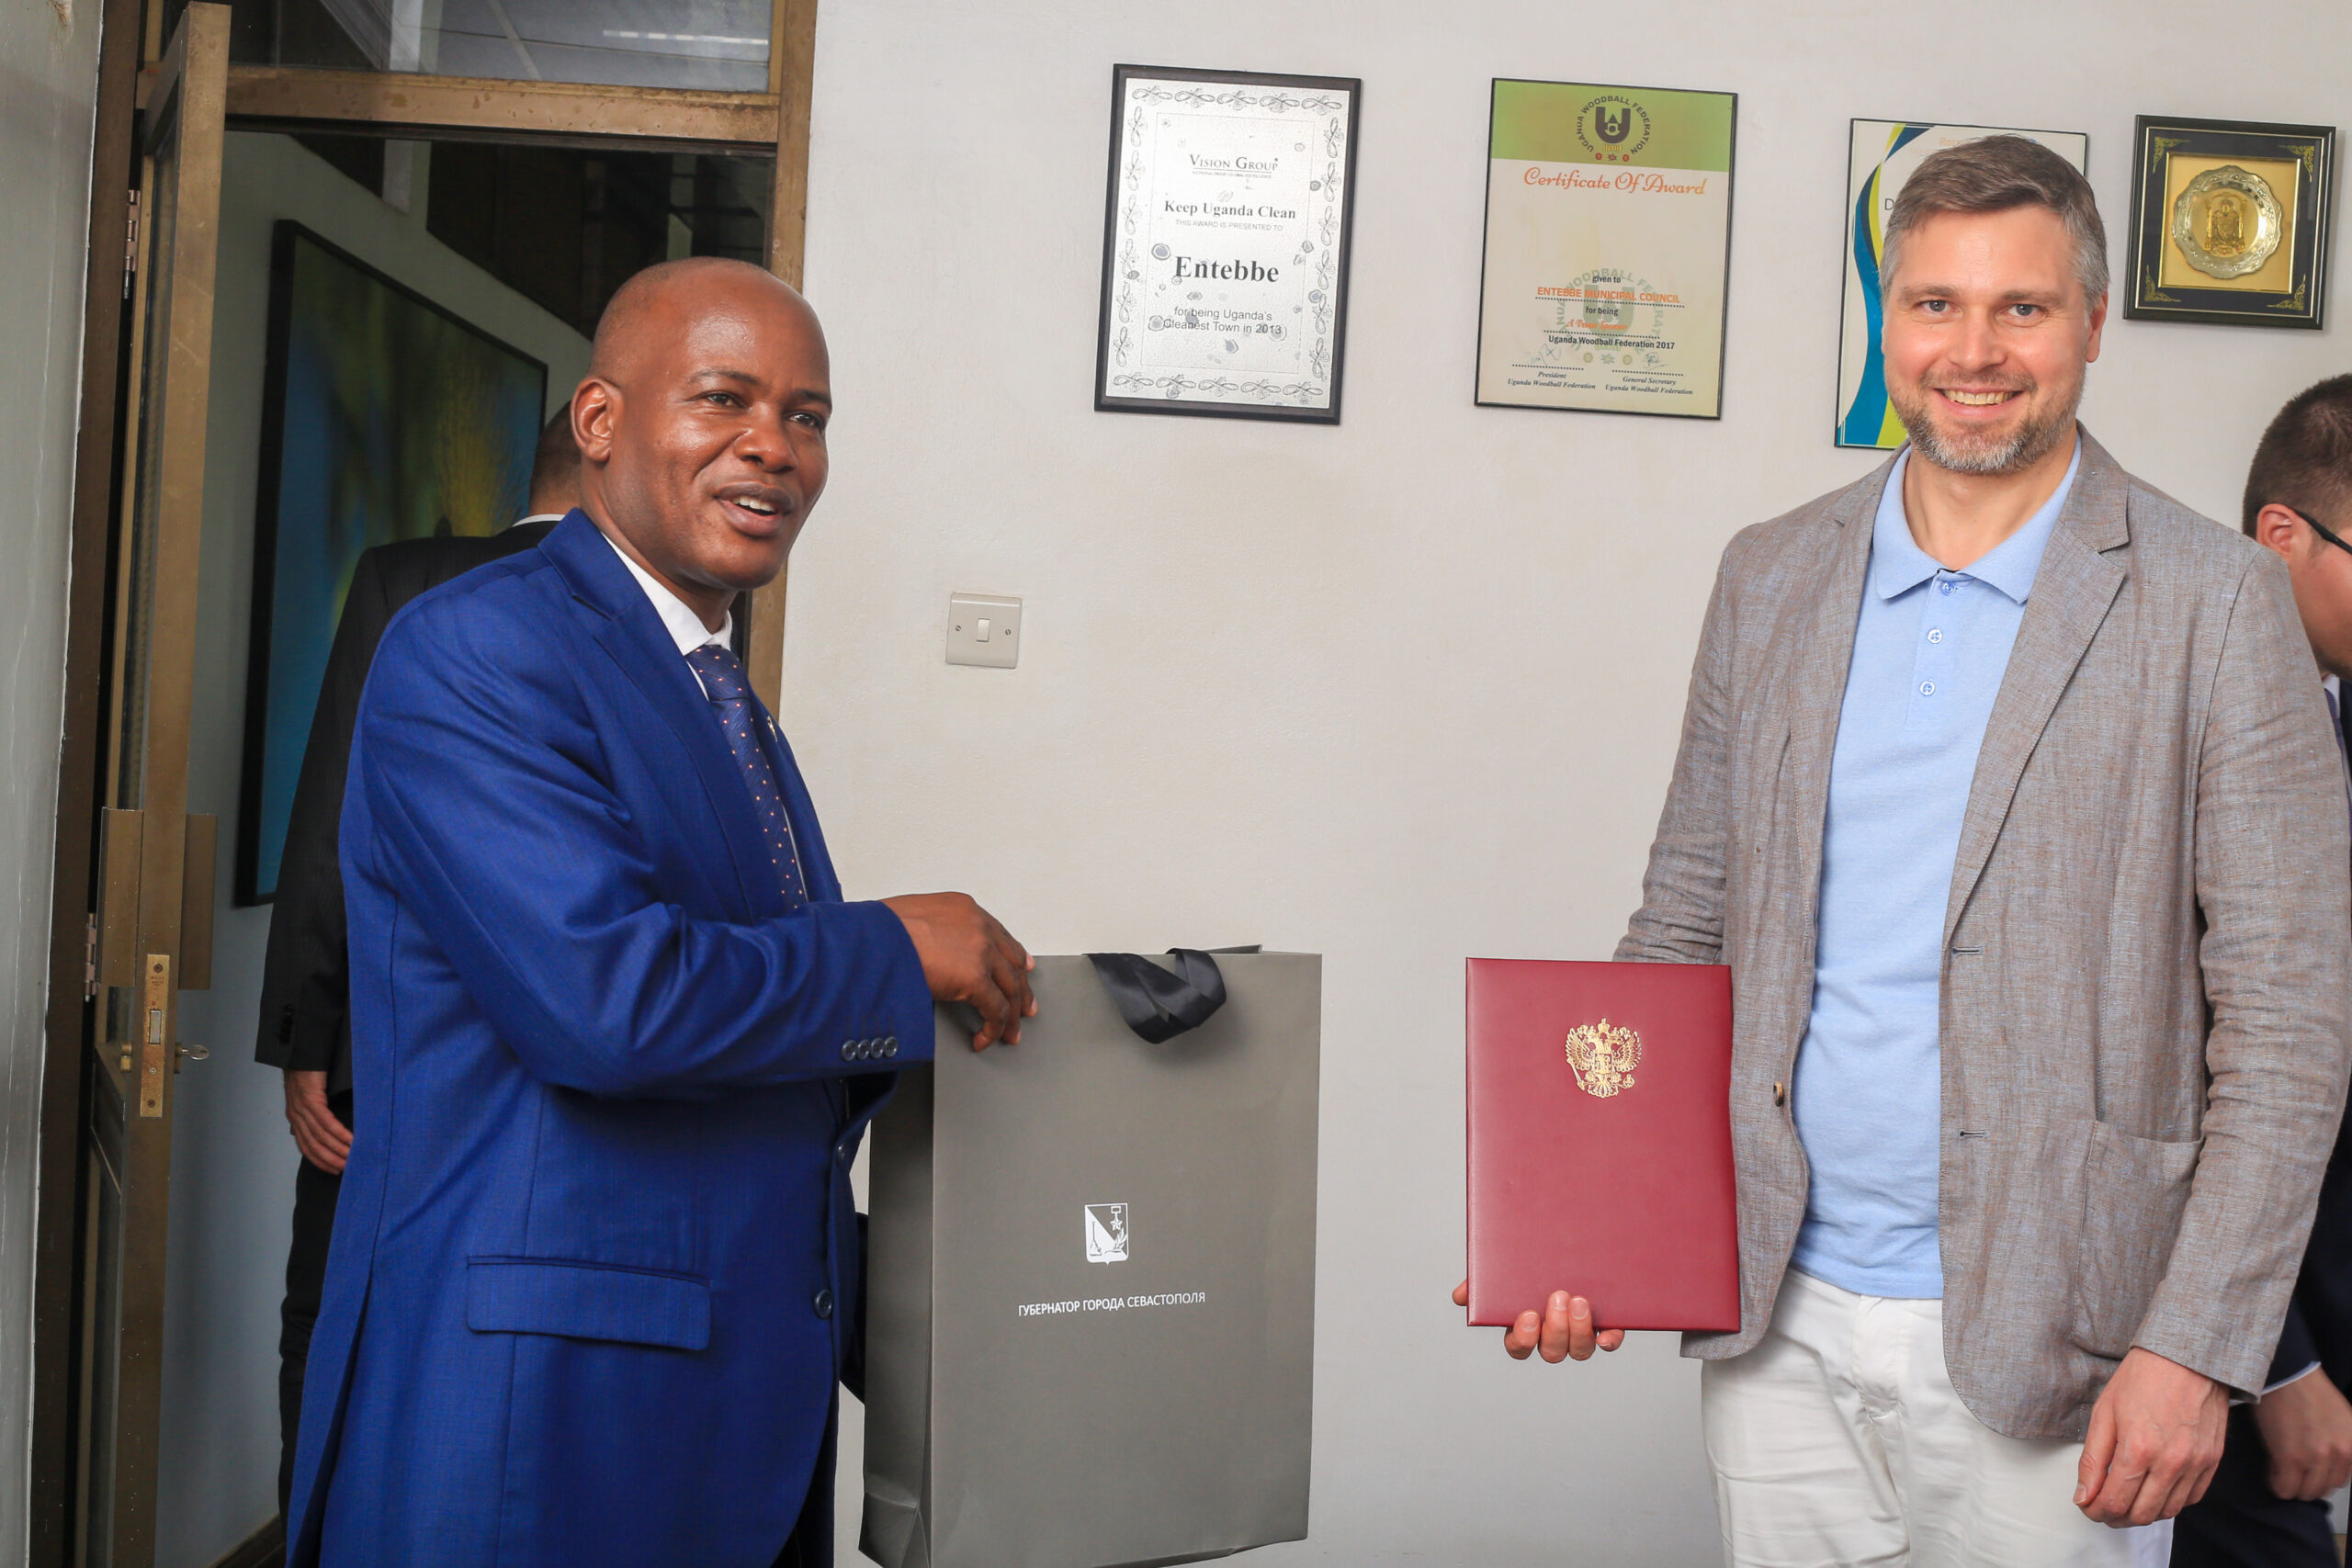 Prof. Jude exchanges pleasantries with Mr. Mansur shortly after signing the MoU.